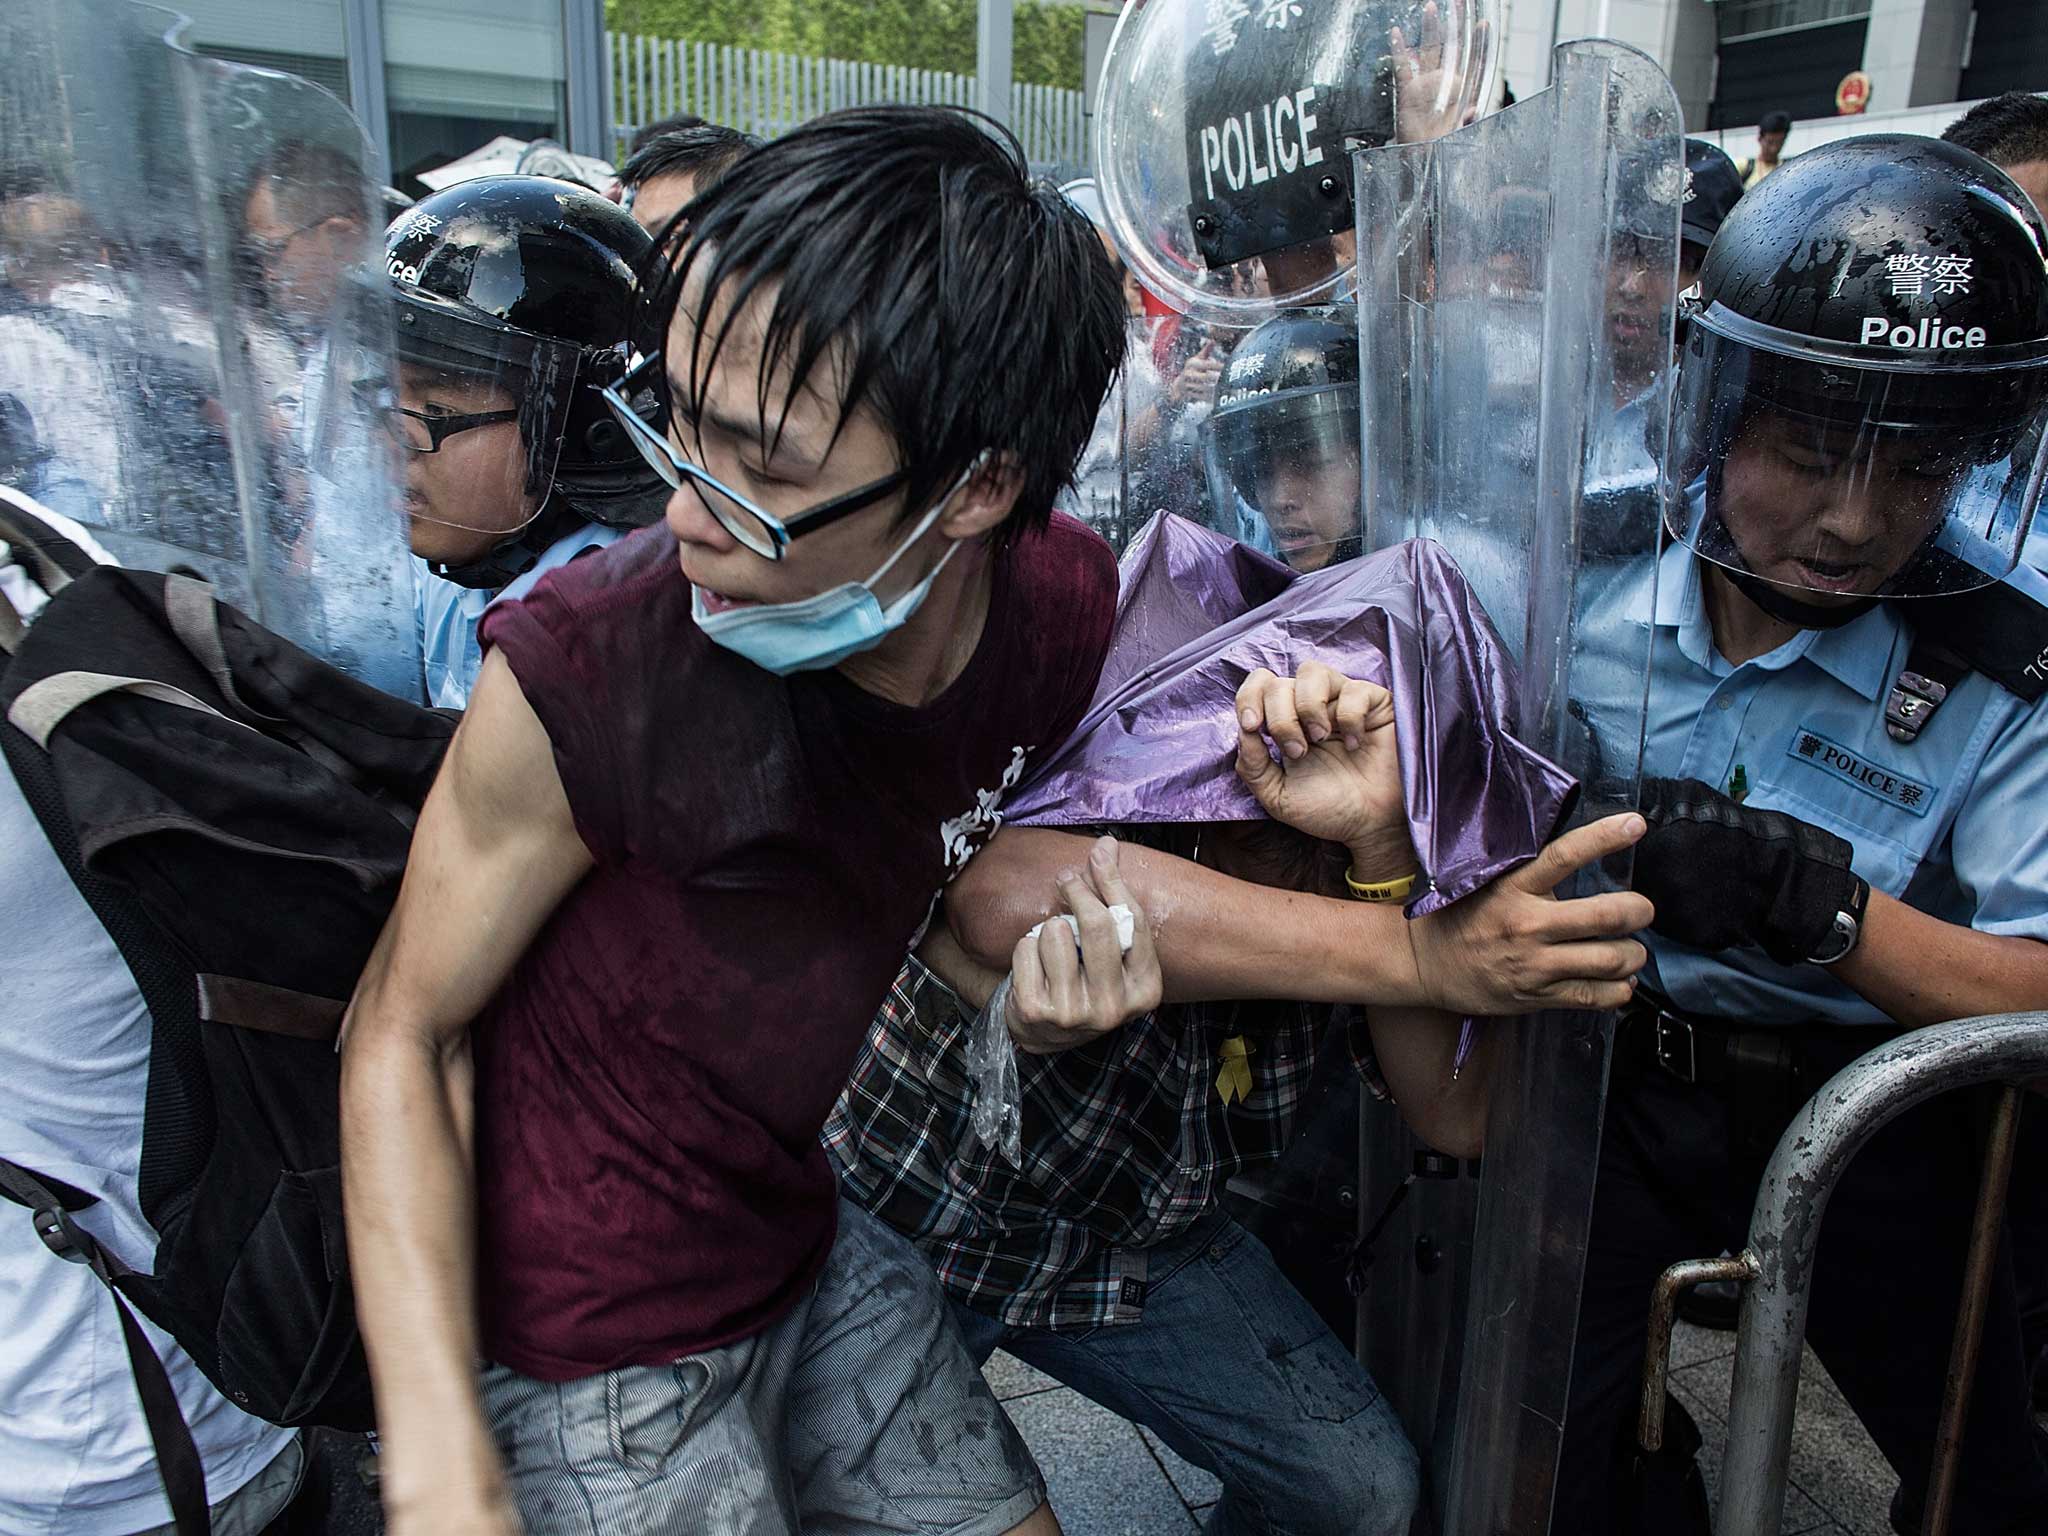 The dispersal followed a night of scuffles between police and about 150 protesters who forced their way into the government compound, some scaling a tall fence